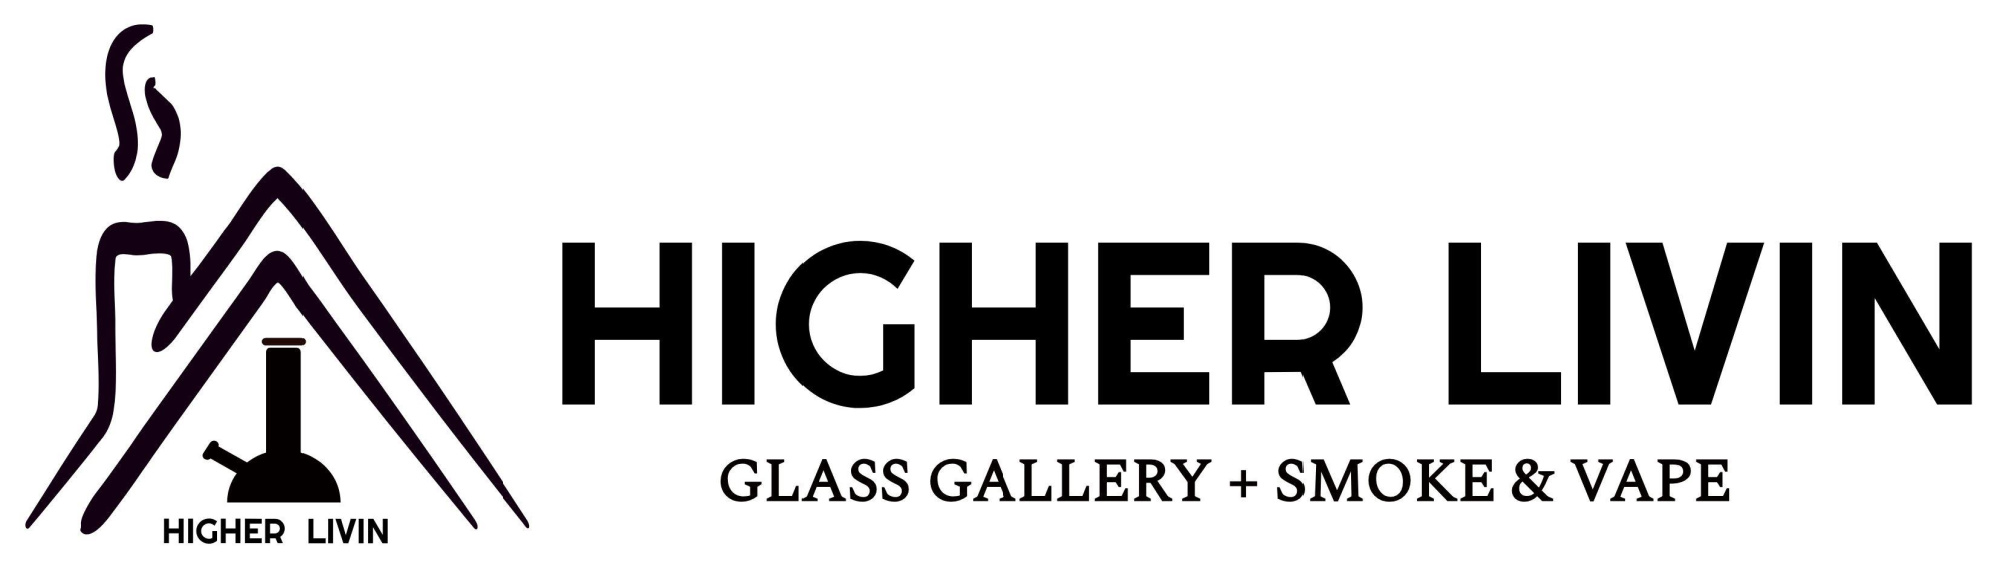 image of higher livin smoke shop & glass gallery